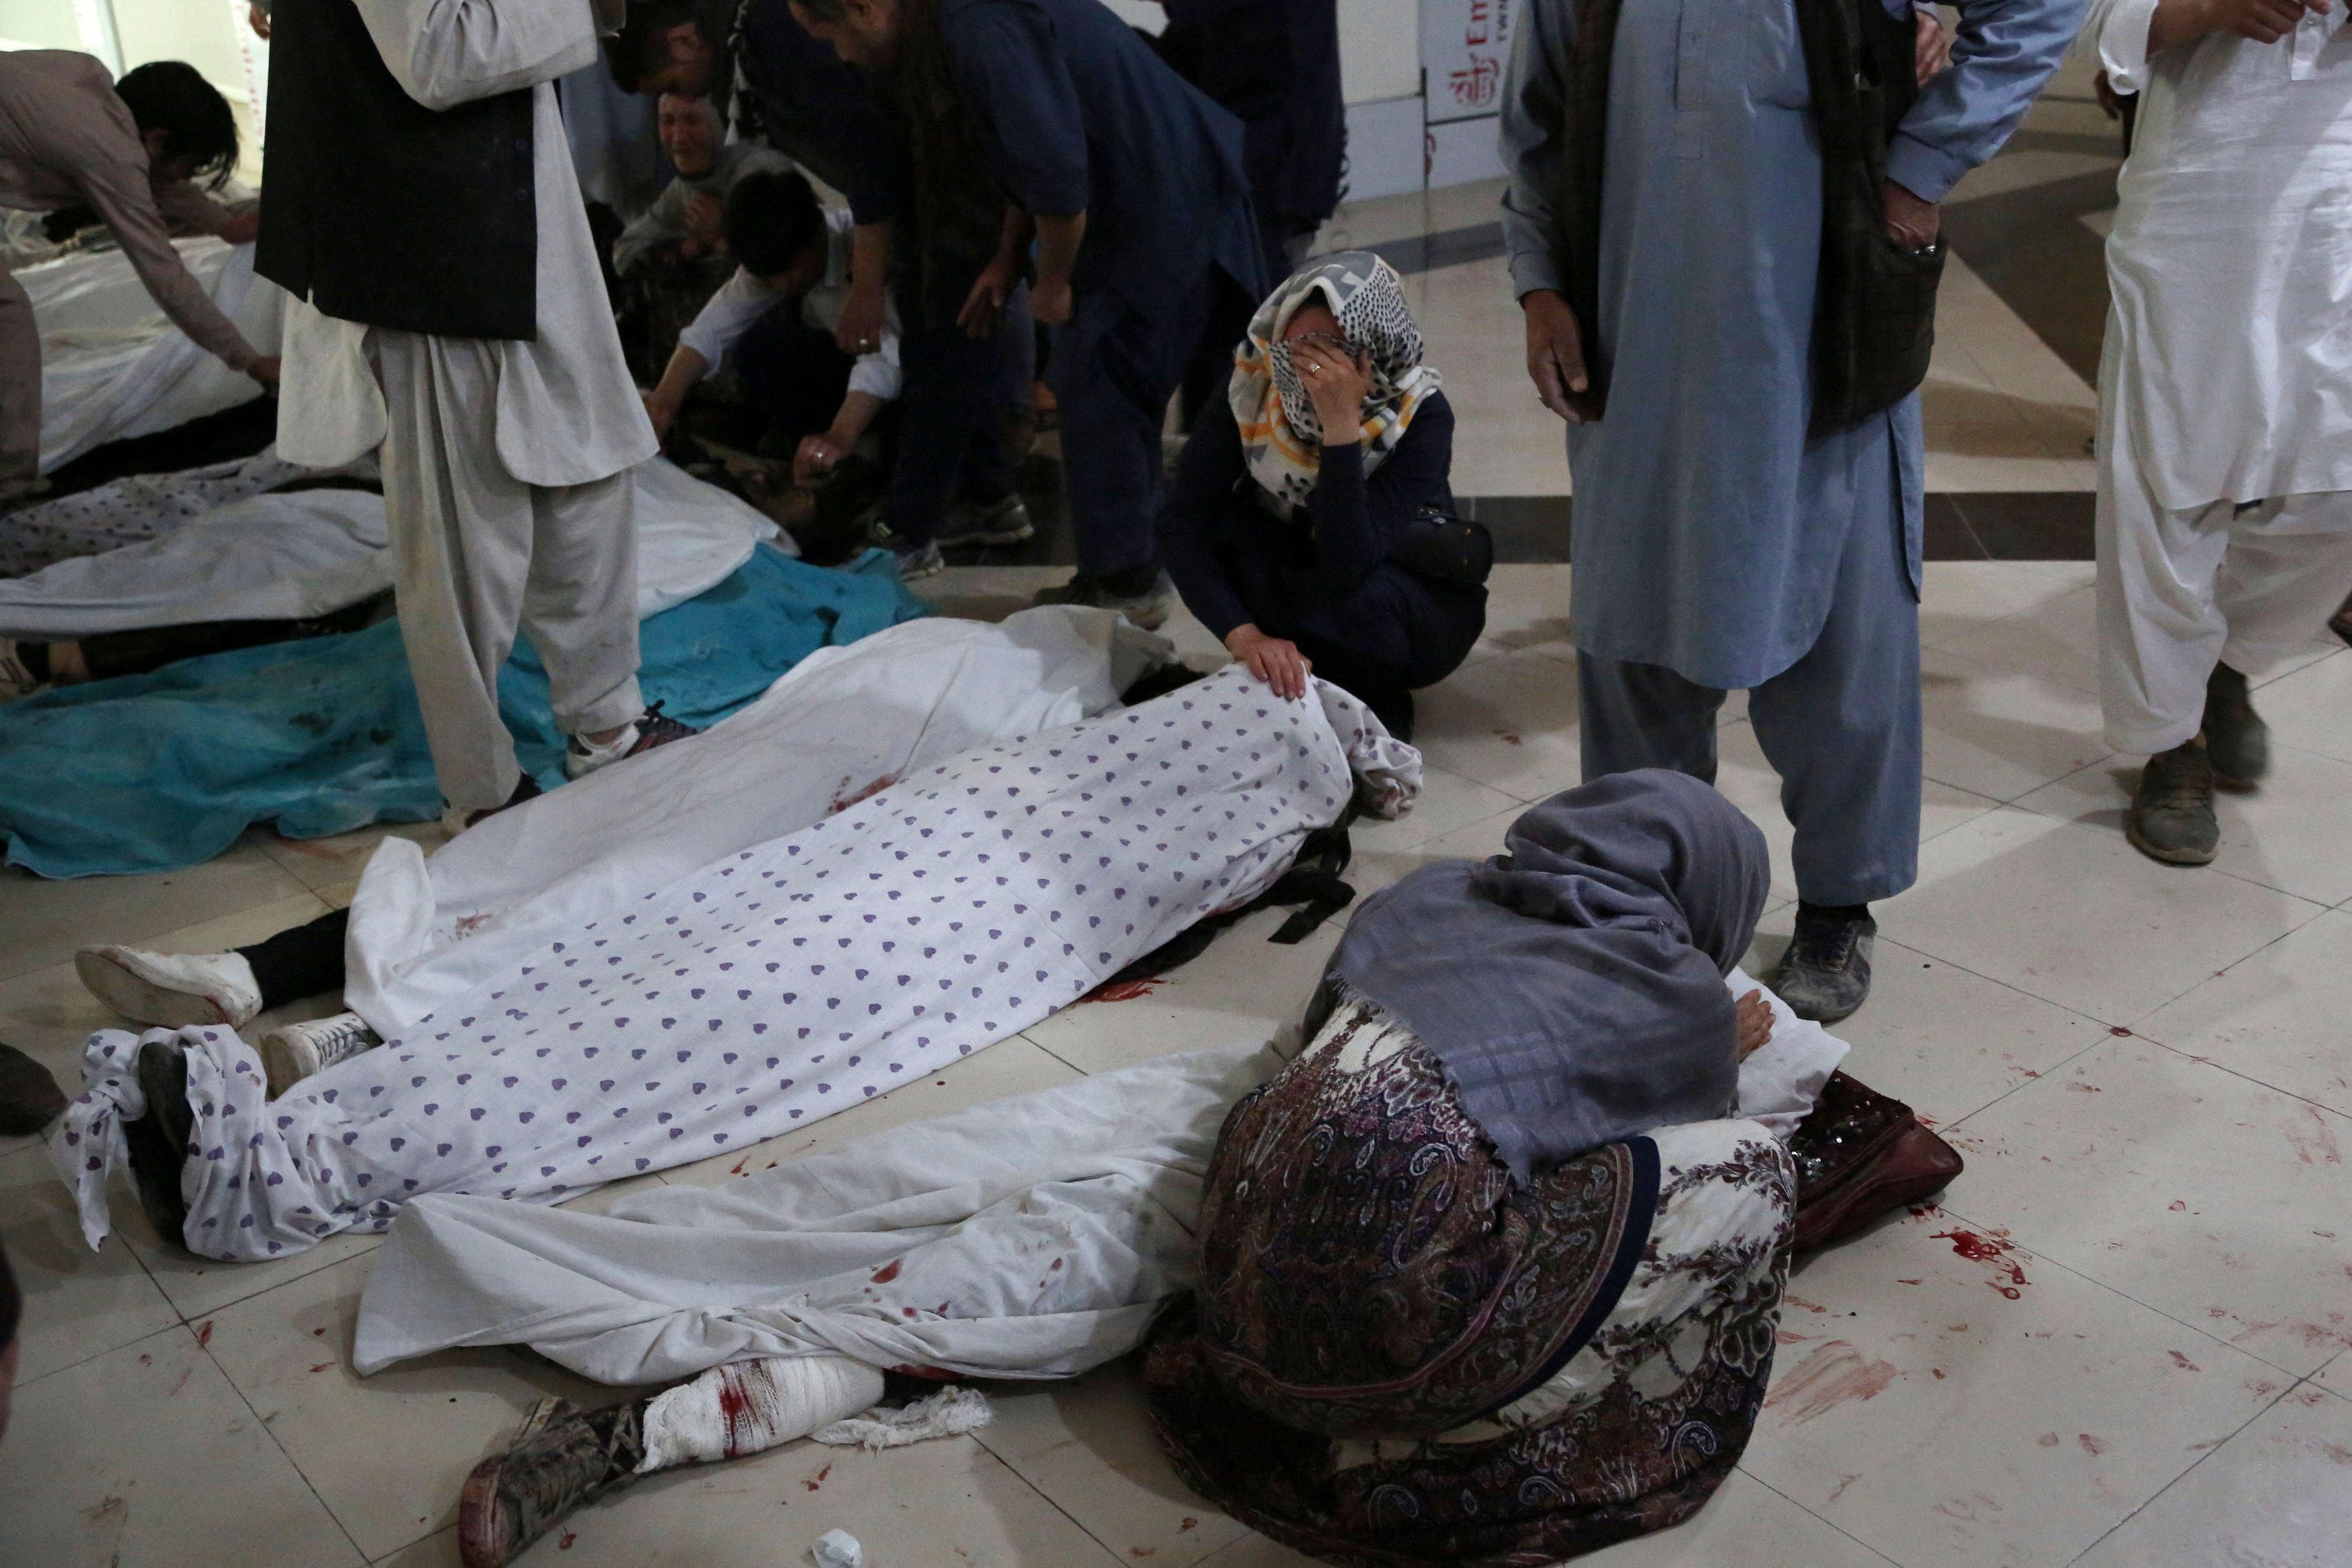 Family members and relatives mourn inside a hospital while sitting next to the bodies of victims who died in a blast outside a school in the west Kabul district of Dasht-e-Barchi, that killed at least 25 people and wounded scores more including students, officials said.